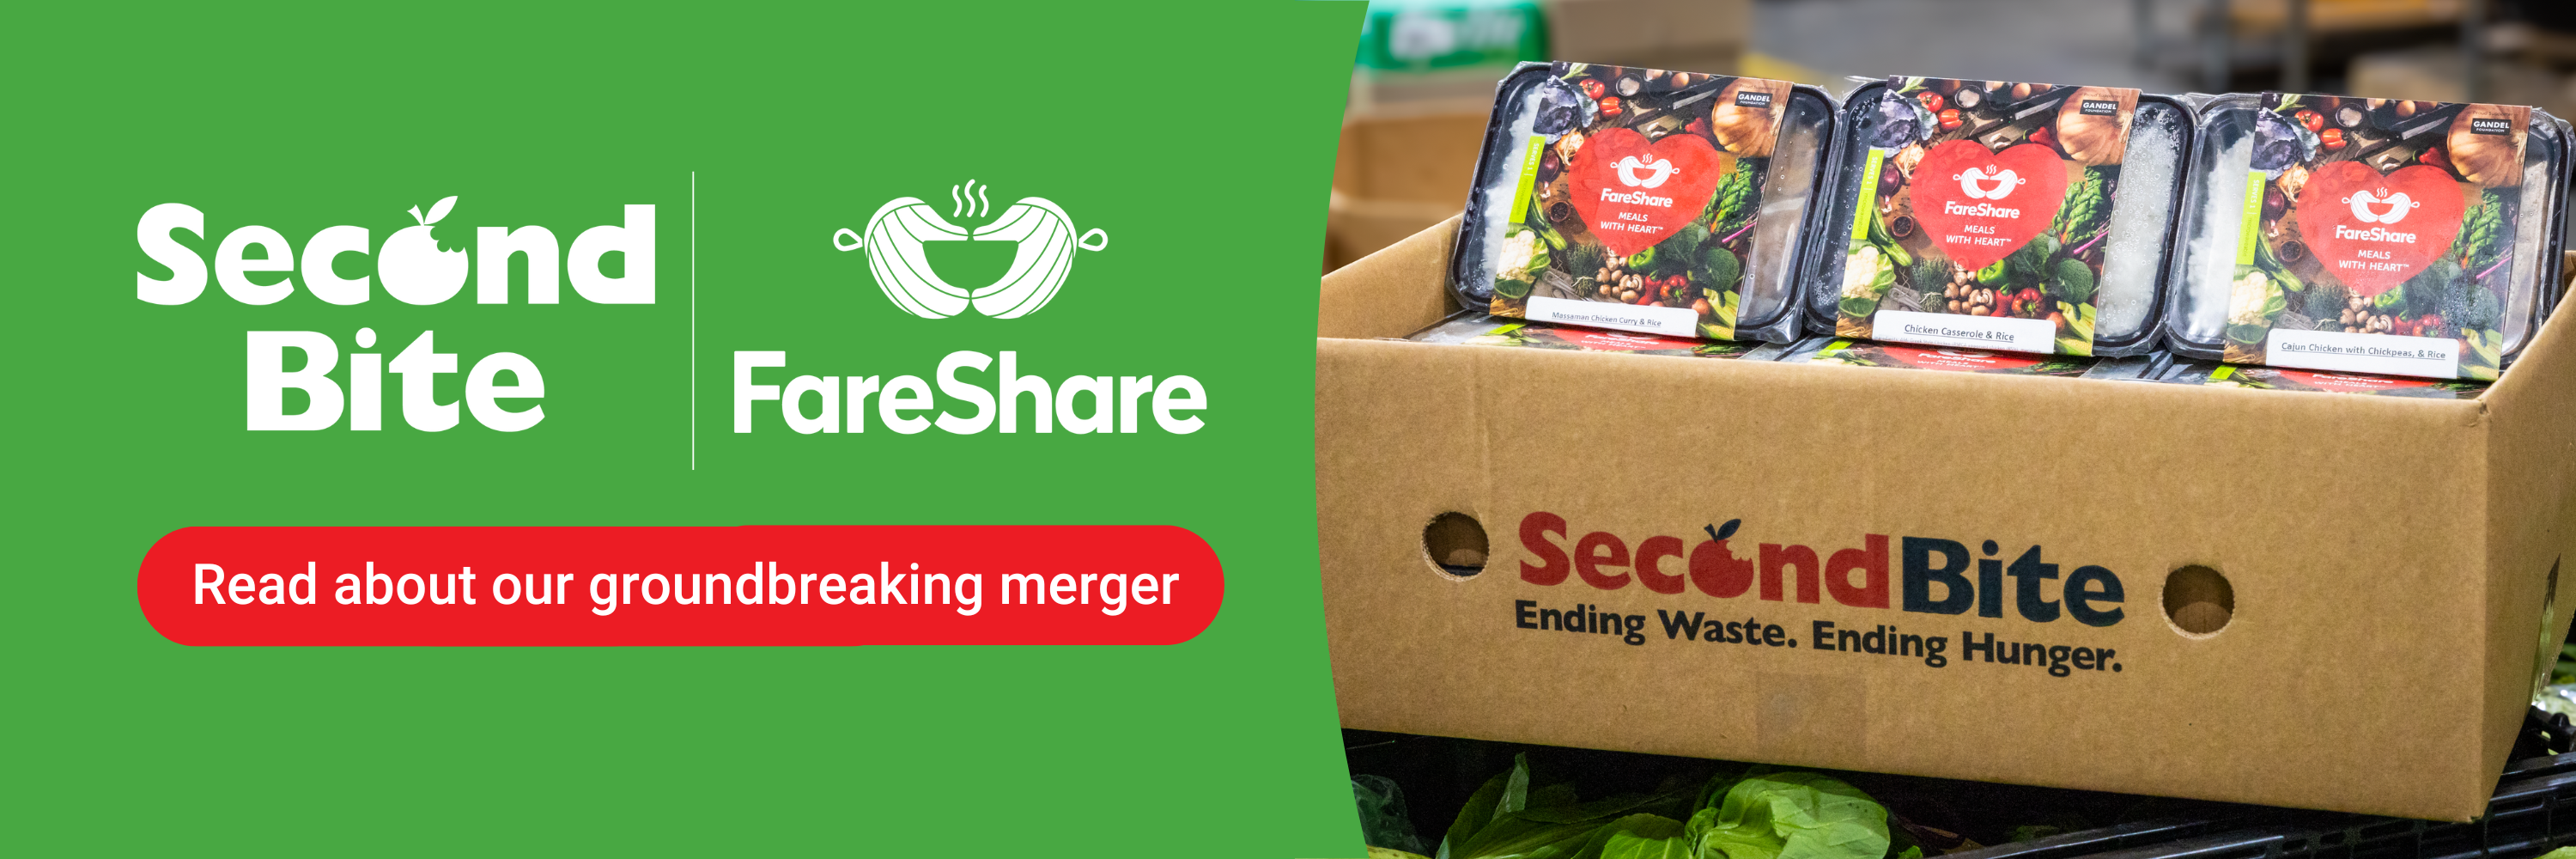 FareShare and SecondBite Food Rescue Organisations